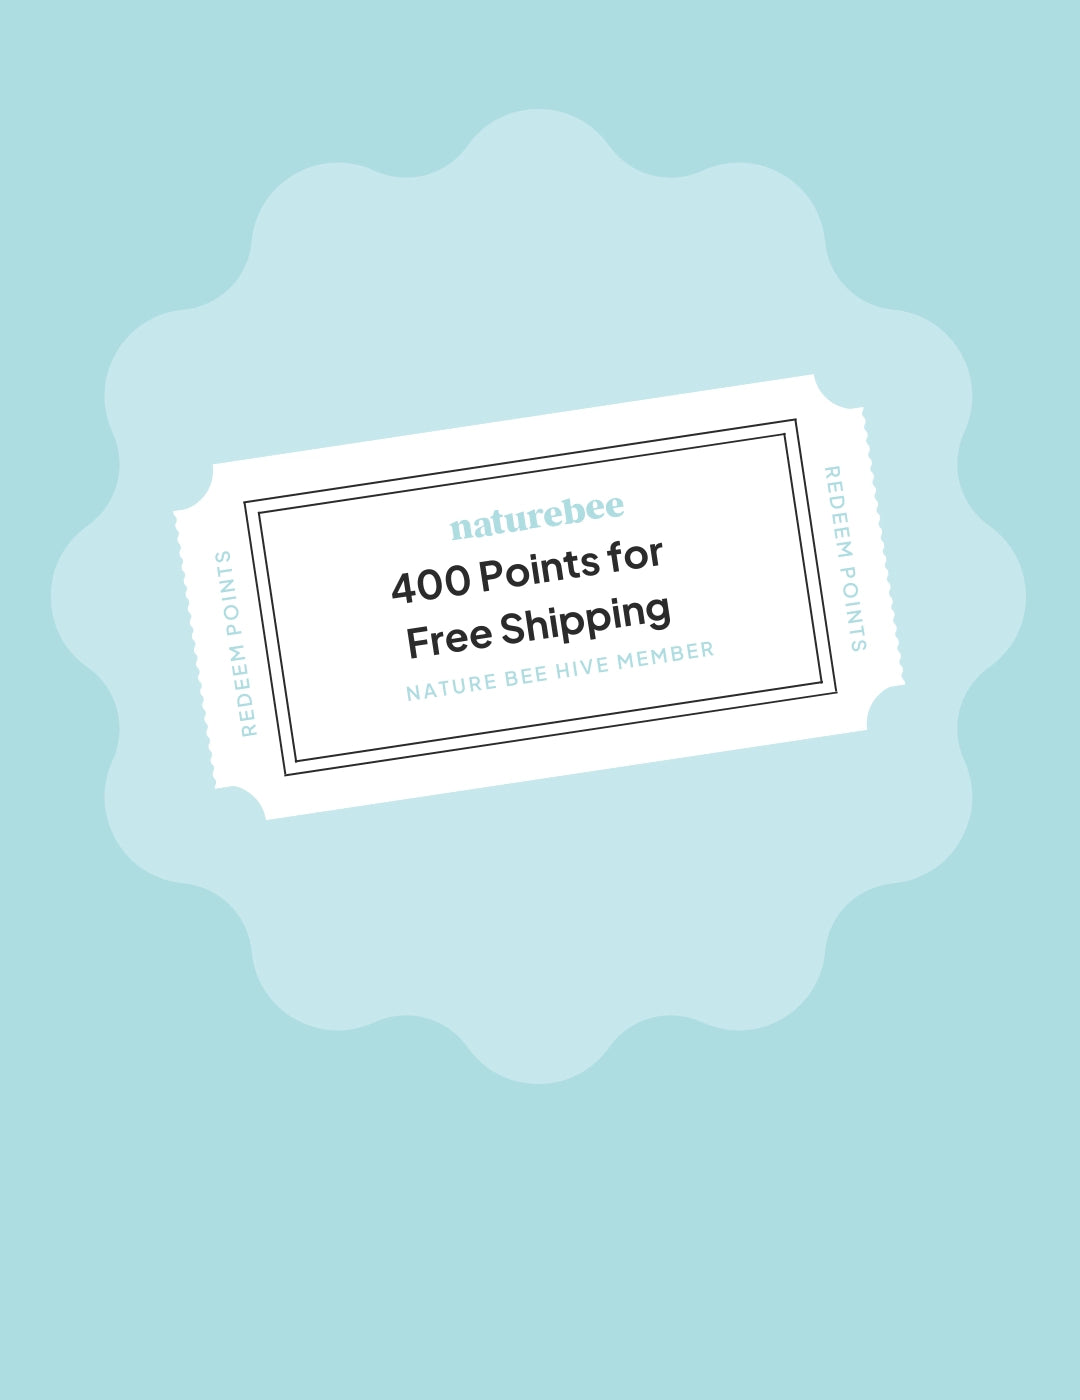 Blue background with a lighter blue icon in the middle. In the image is a ticket for Nature Bee's rewards program to redeem points. Redeem 400 points for Free Shipping on your next order. 